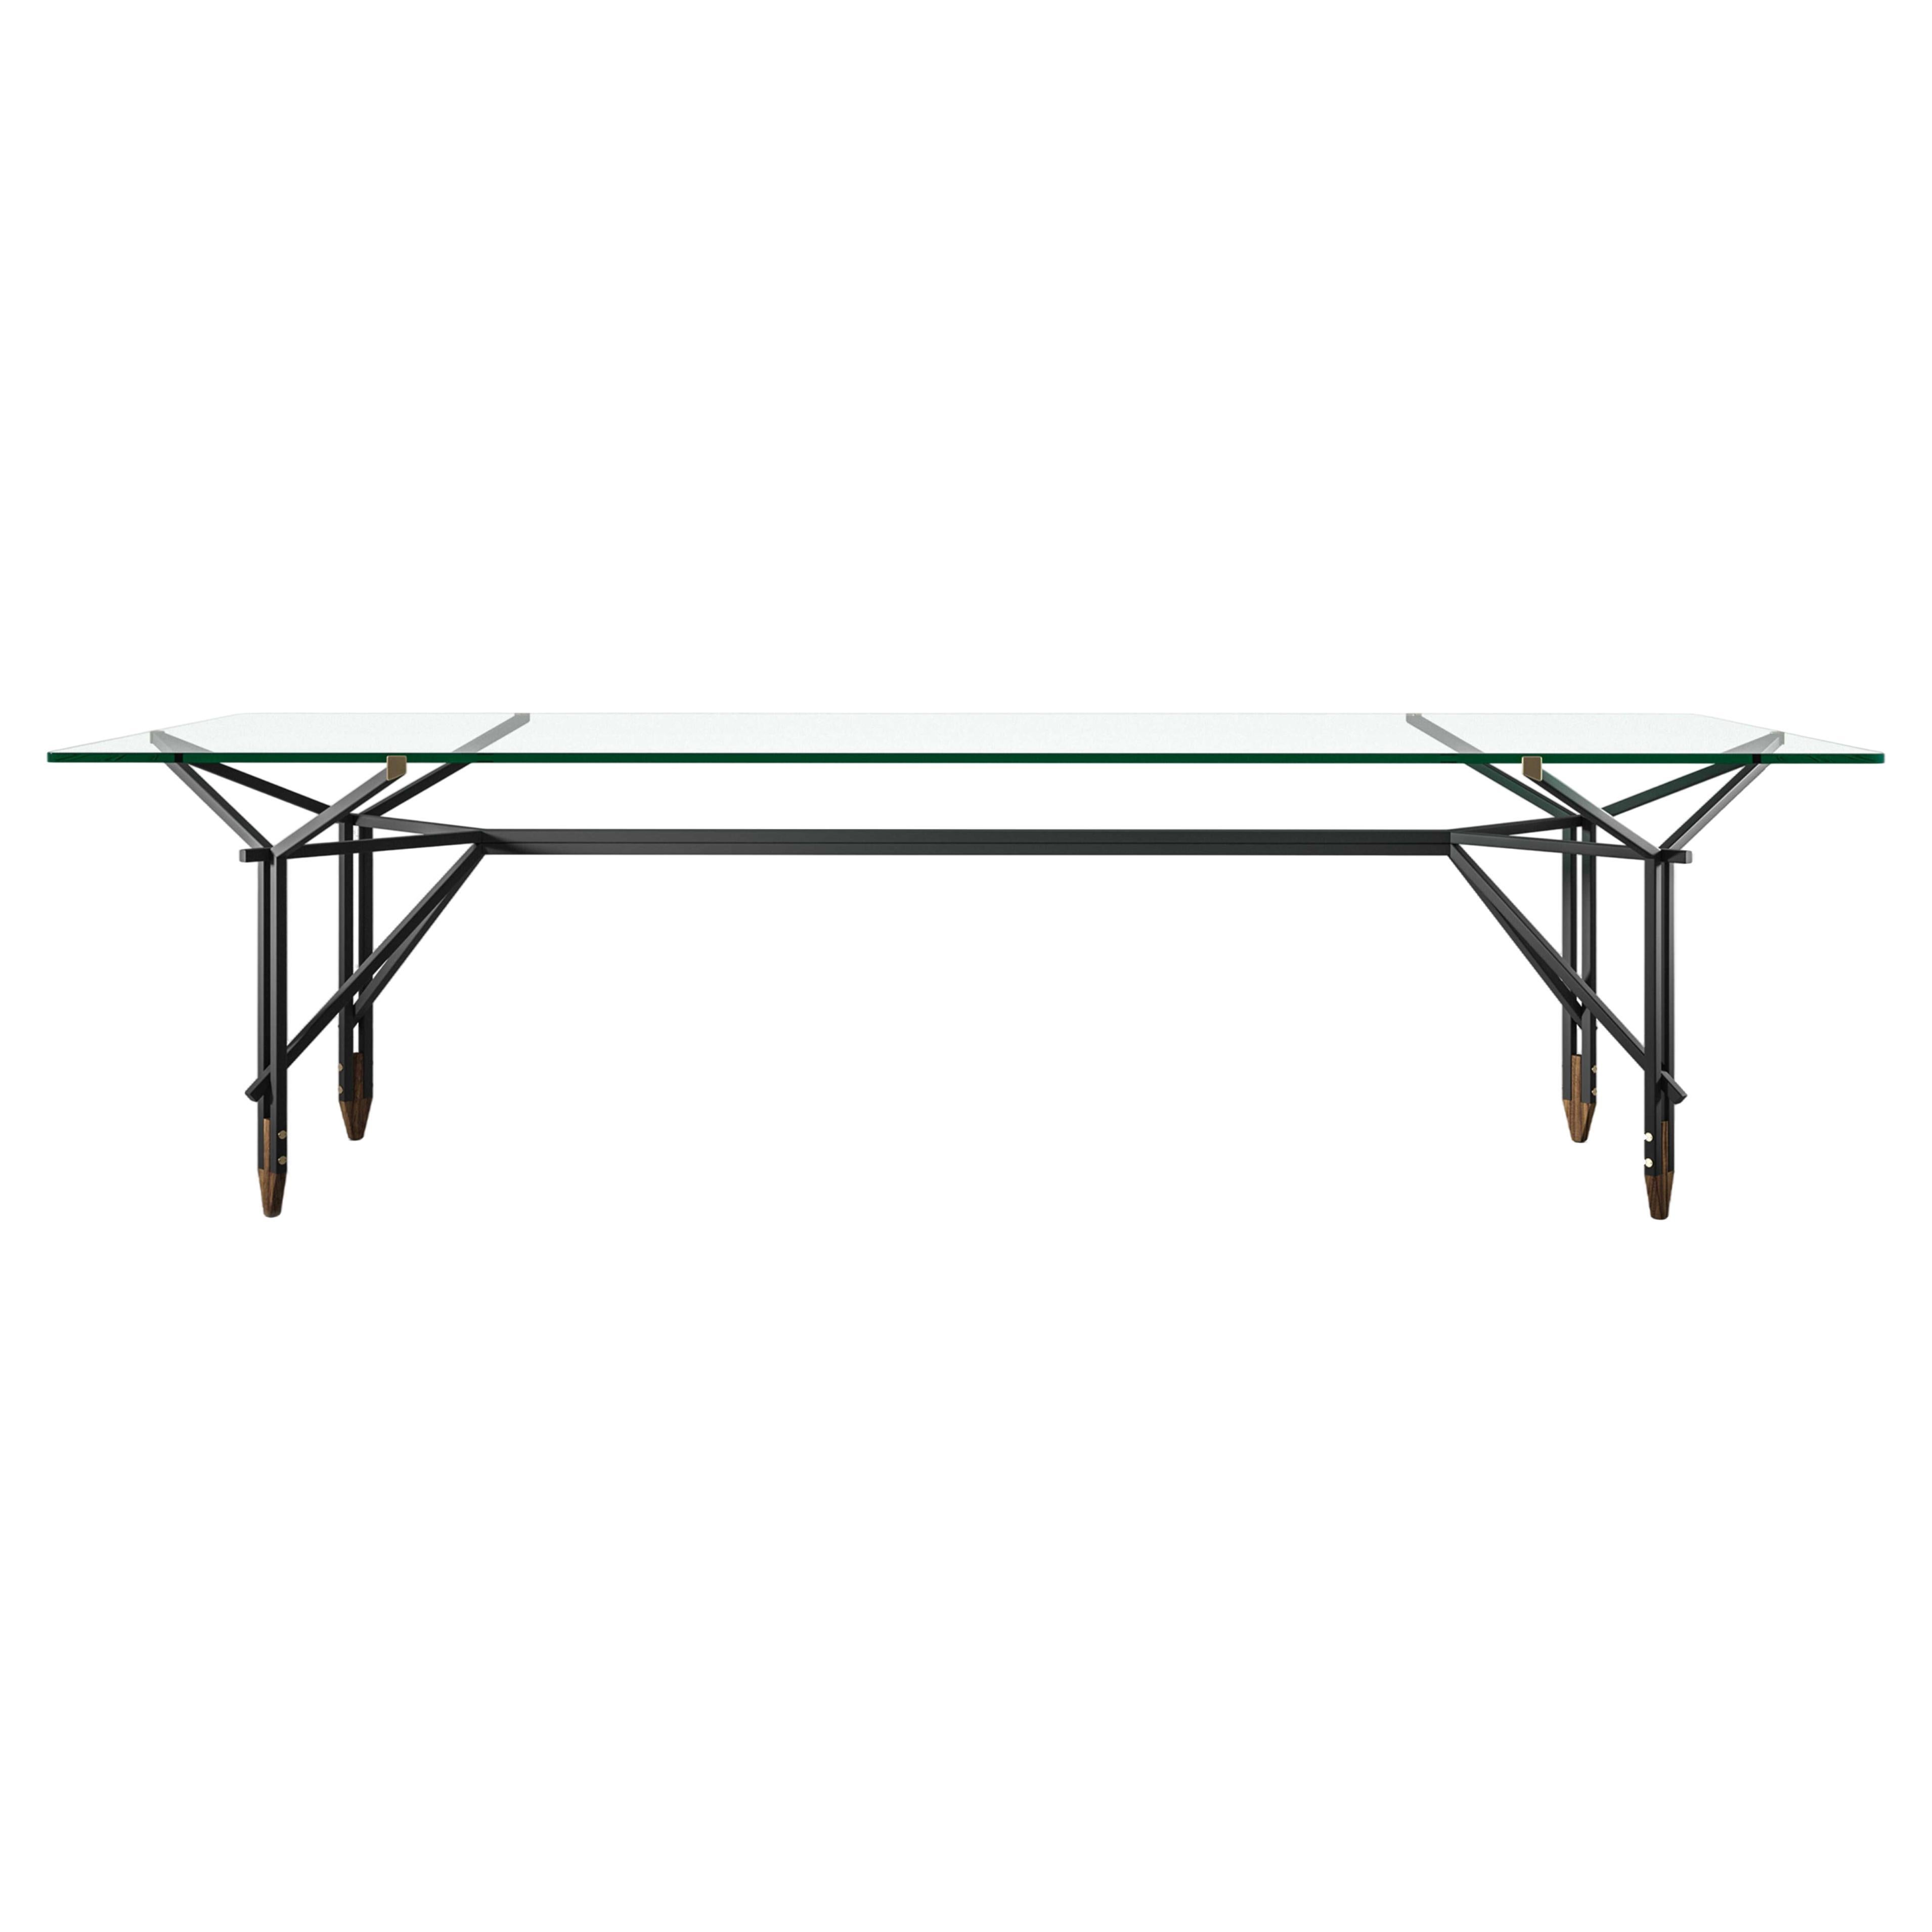 Ico Parisi Olimpino Sculptural Glass Metal Dining Table for Cassina, new